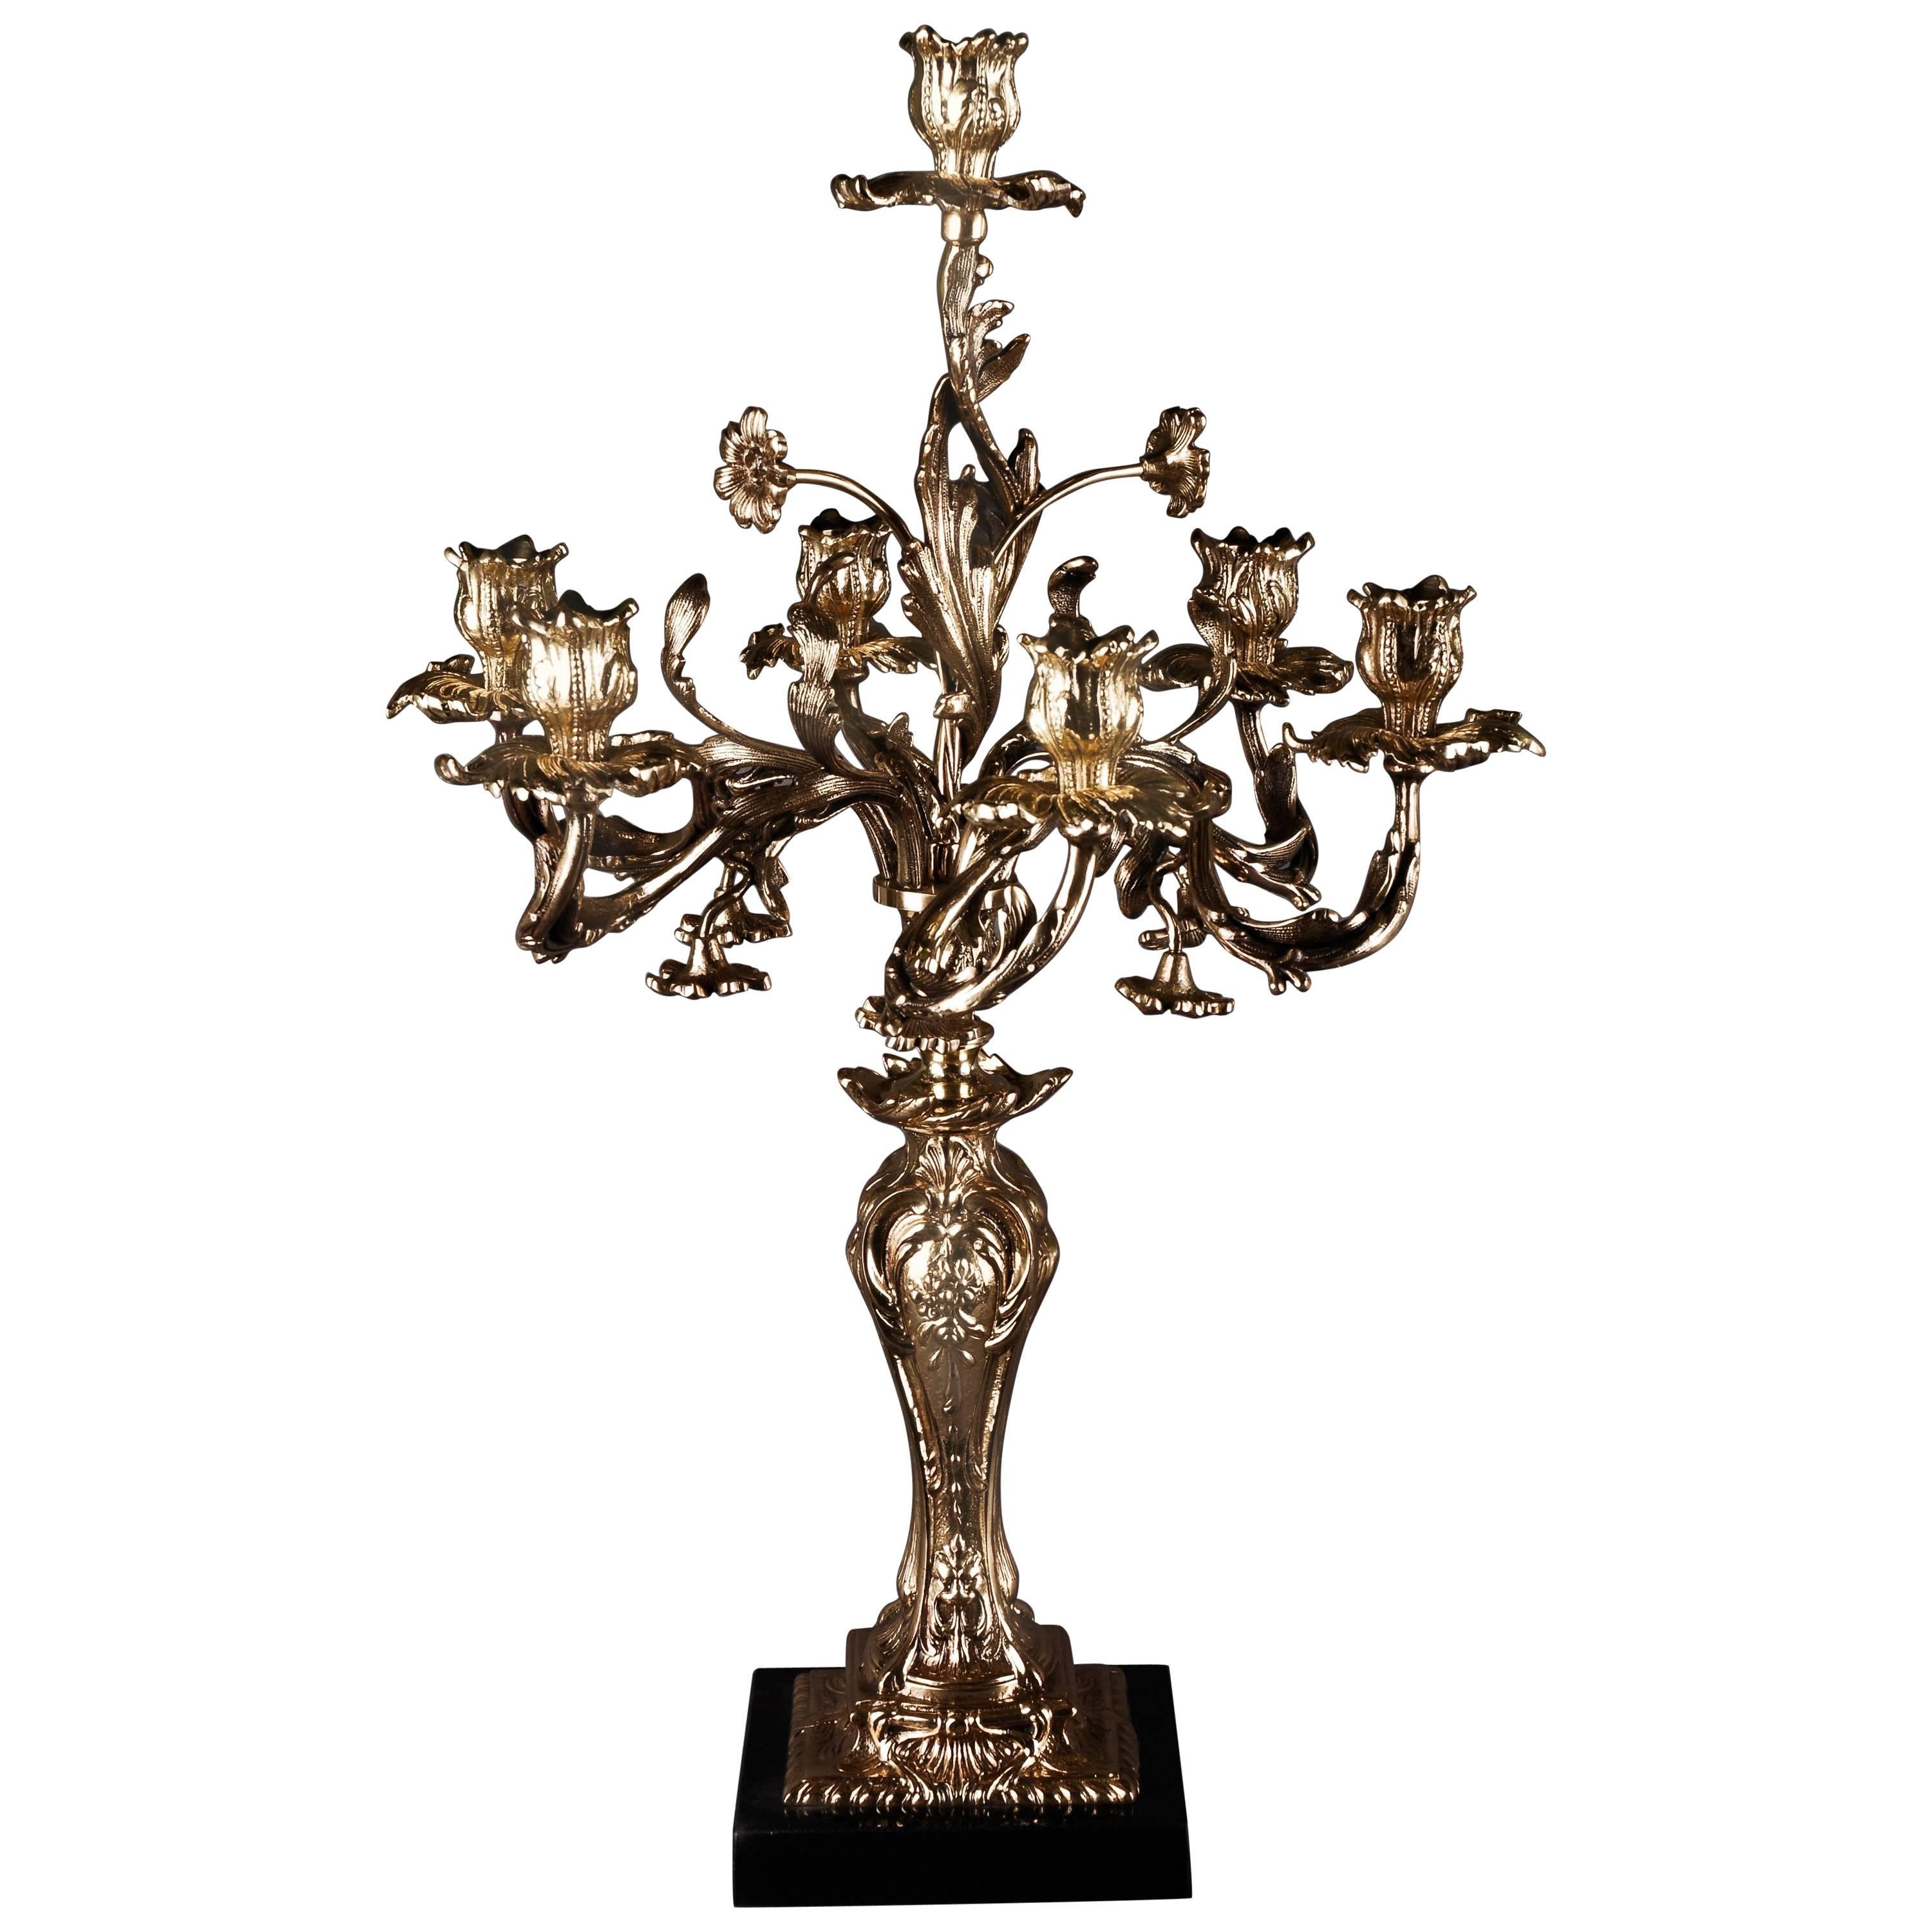 Exquisite Candelabra in Rococo Style For Sale